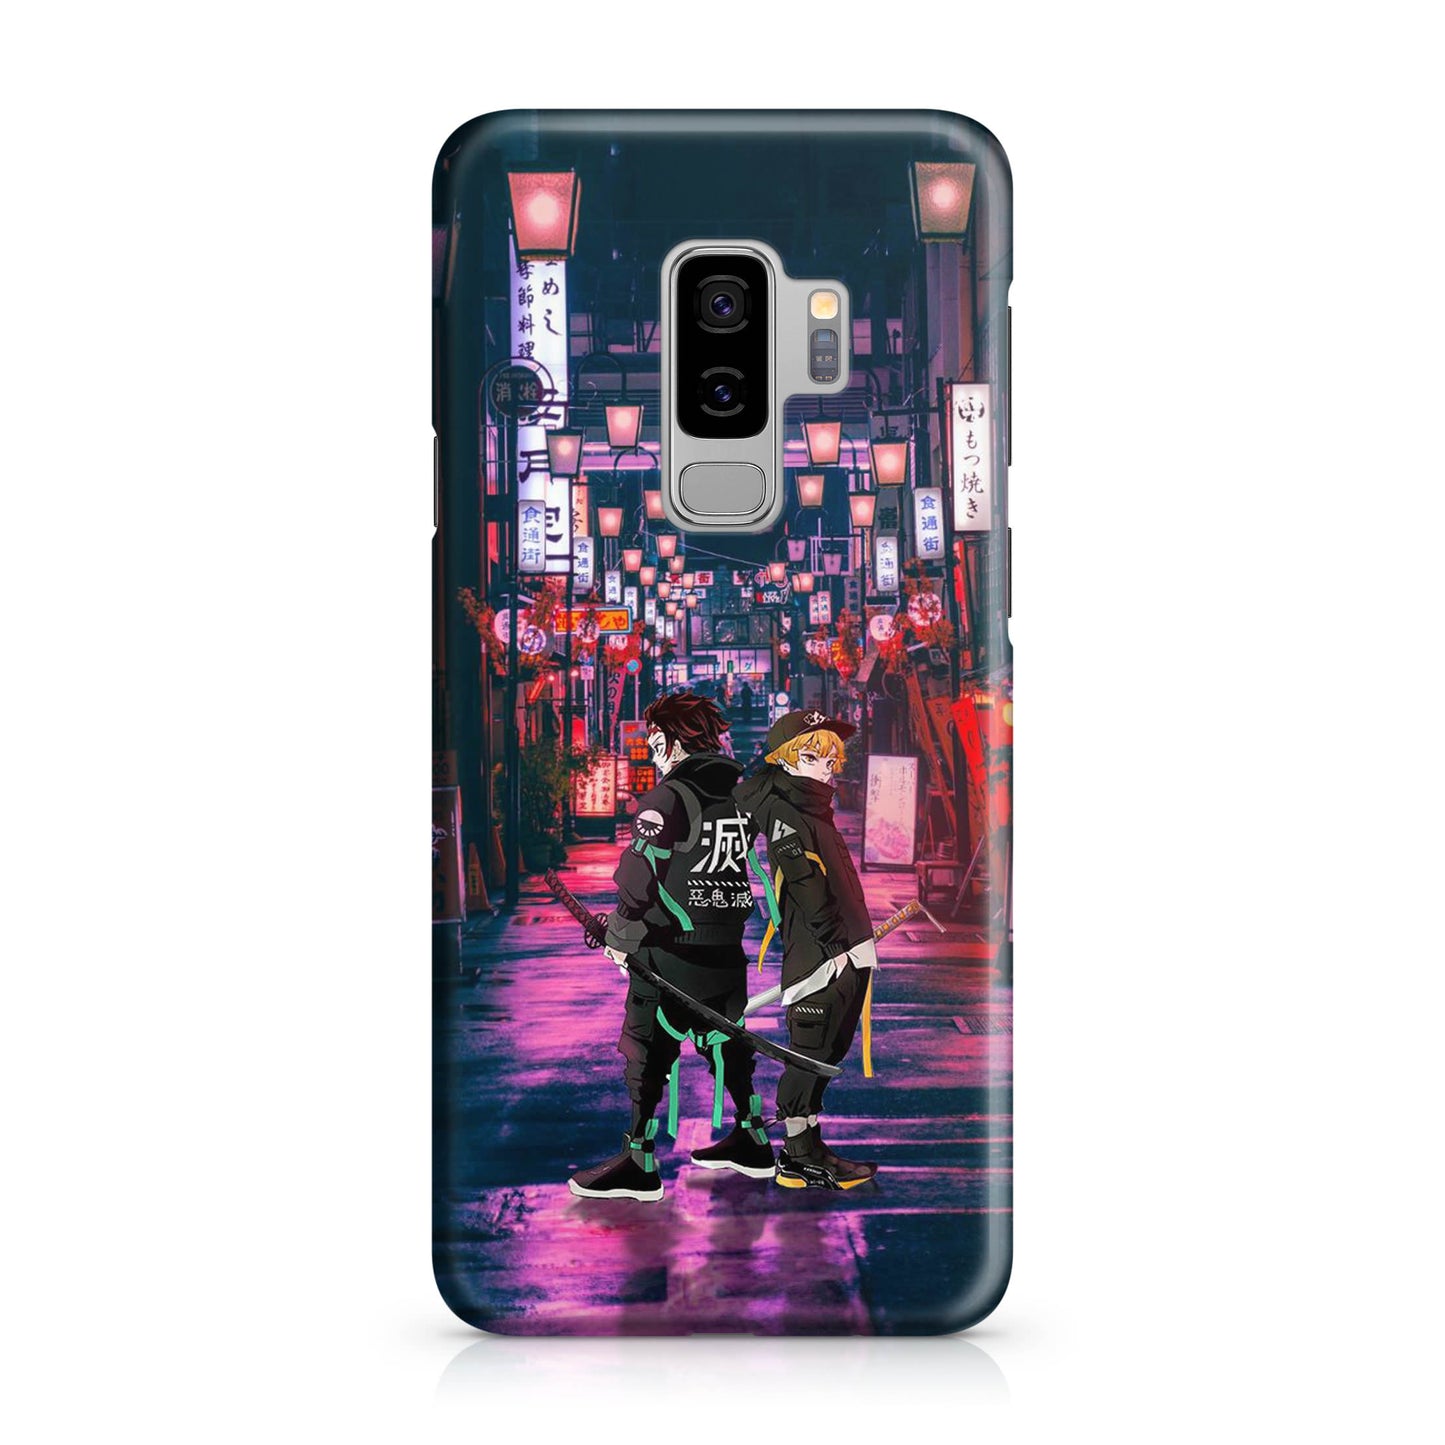 Tanjir0 And Zenittsu in Style Galaxy S9 Plus Case